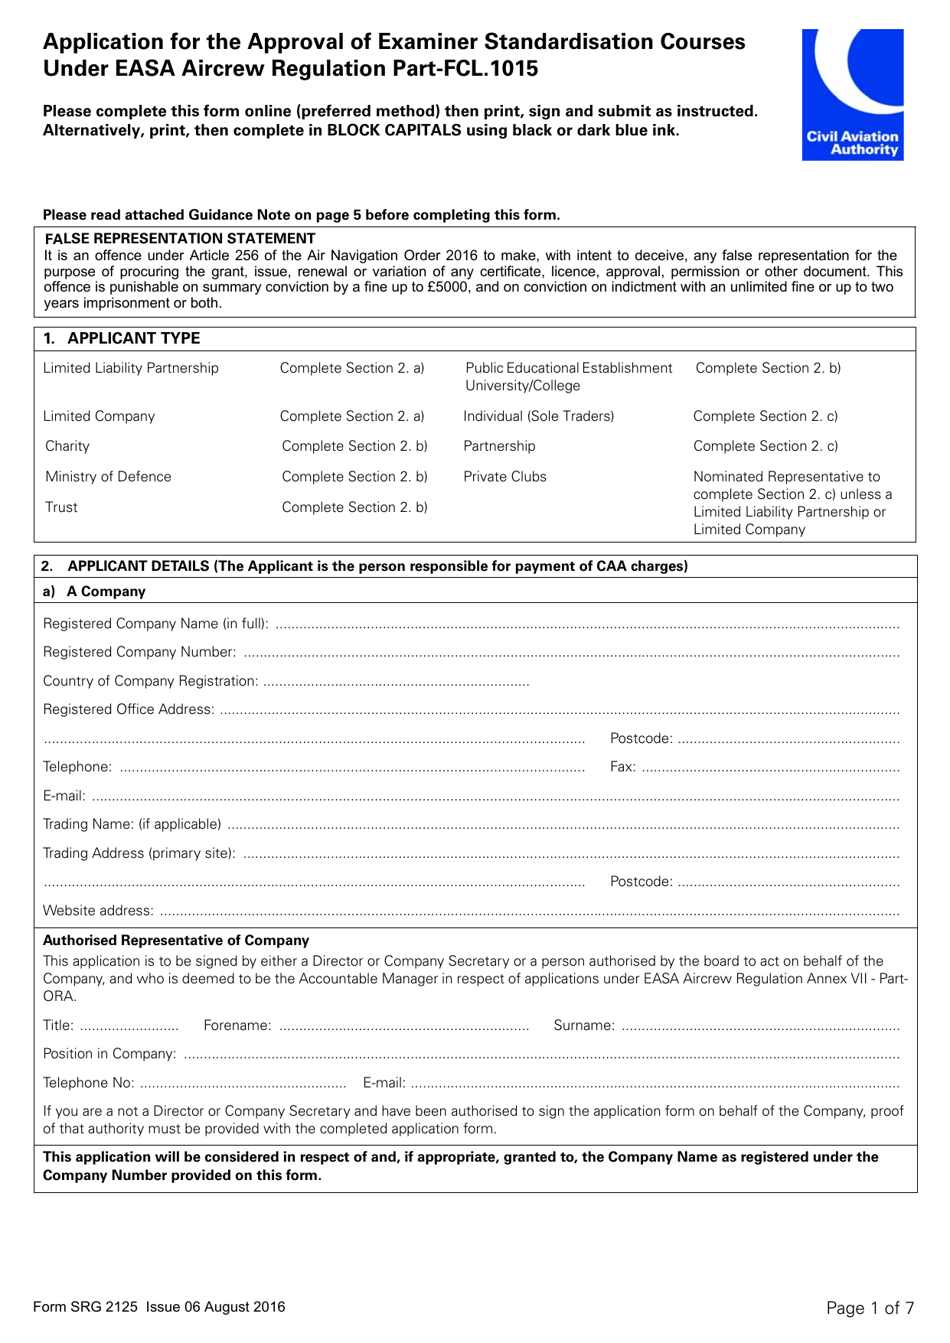 Form SRG2125 Application for the Approval of Examiner Standardisation Courses Under Easa Aircrew Regulation Part-Fcl.1015 - United Kingdom, Page 1